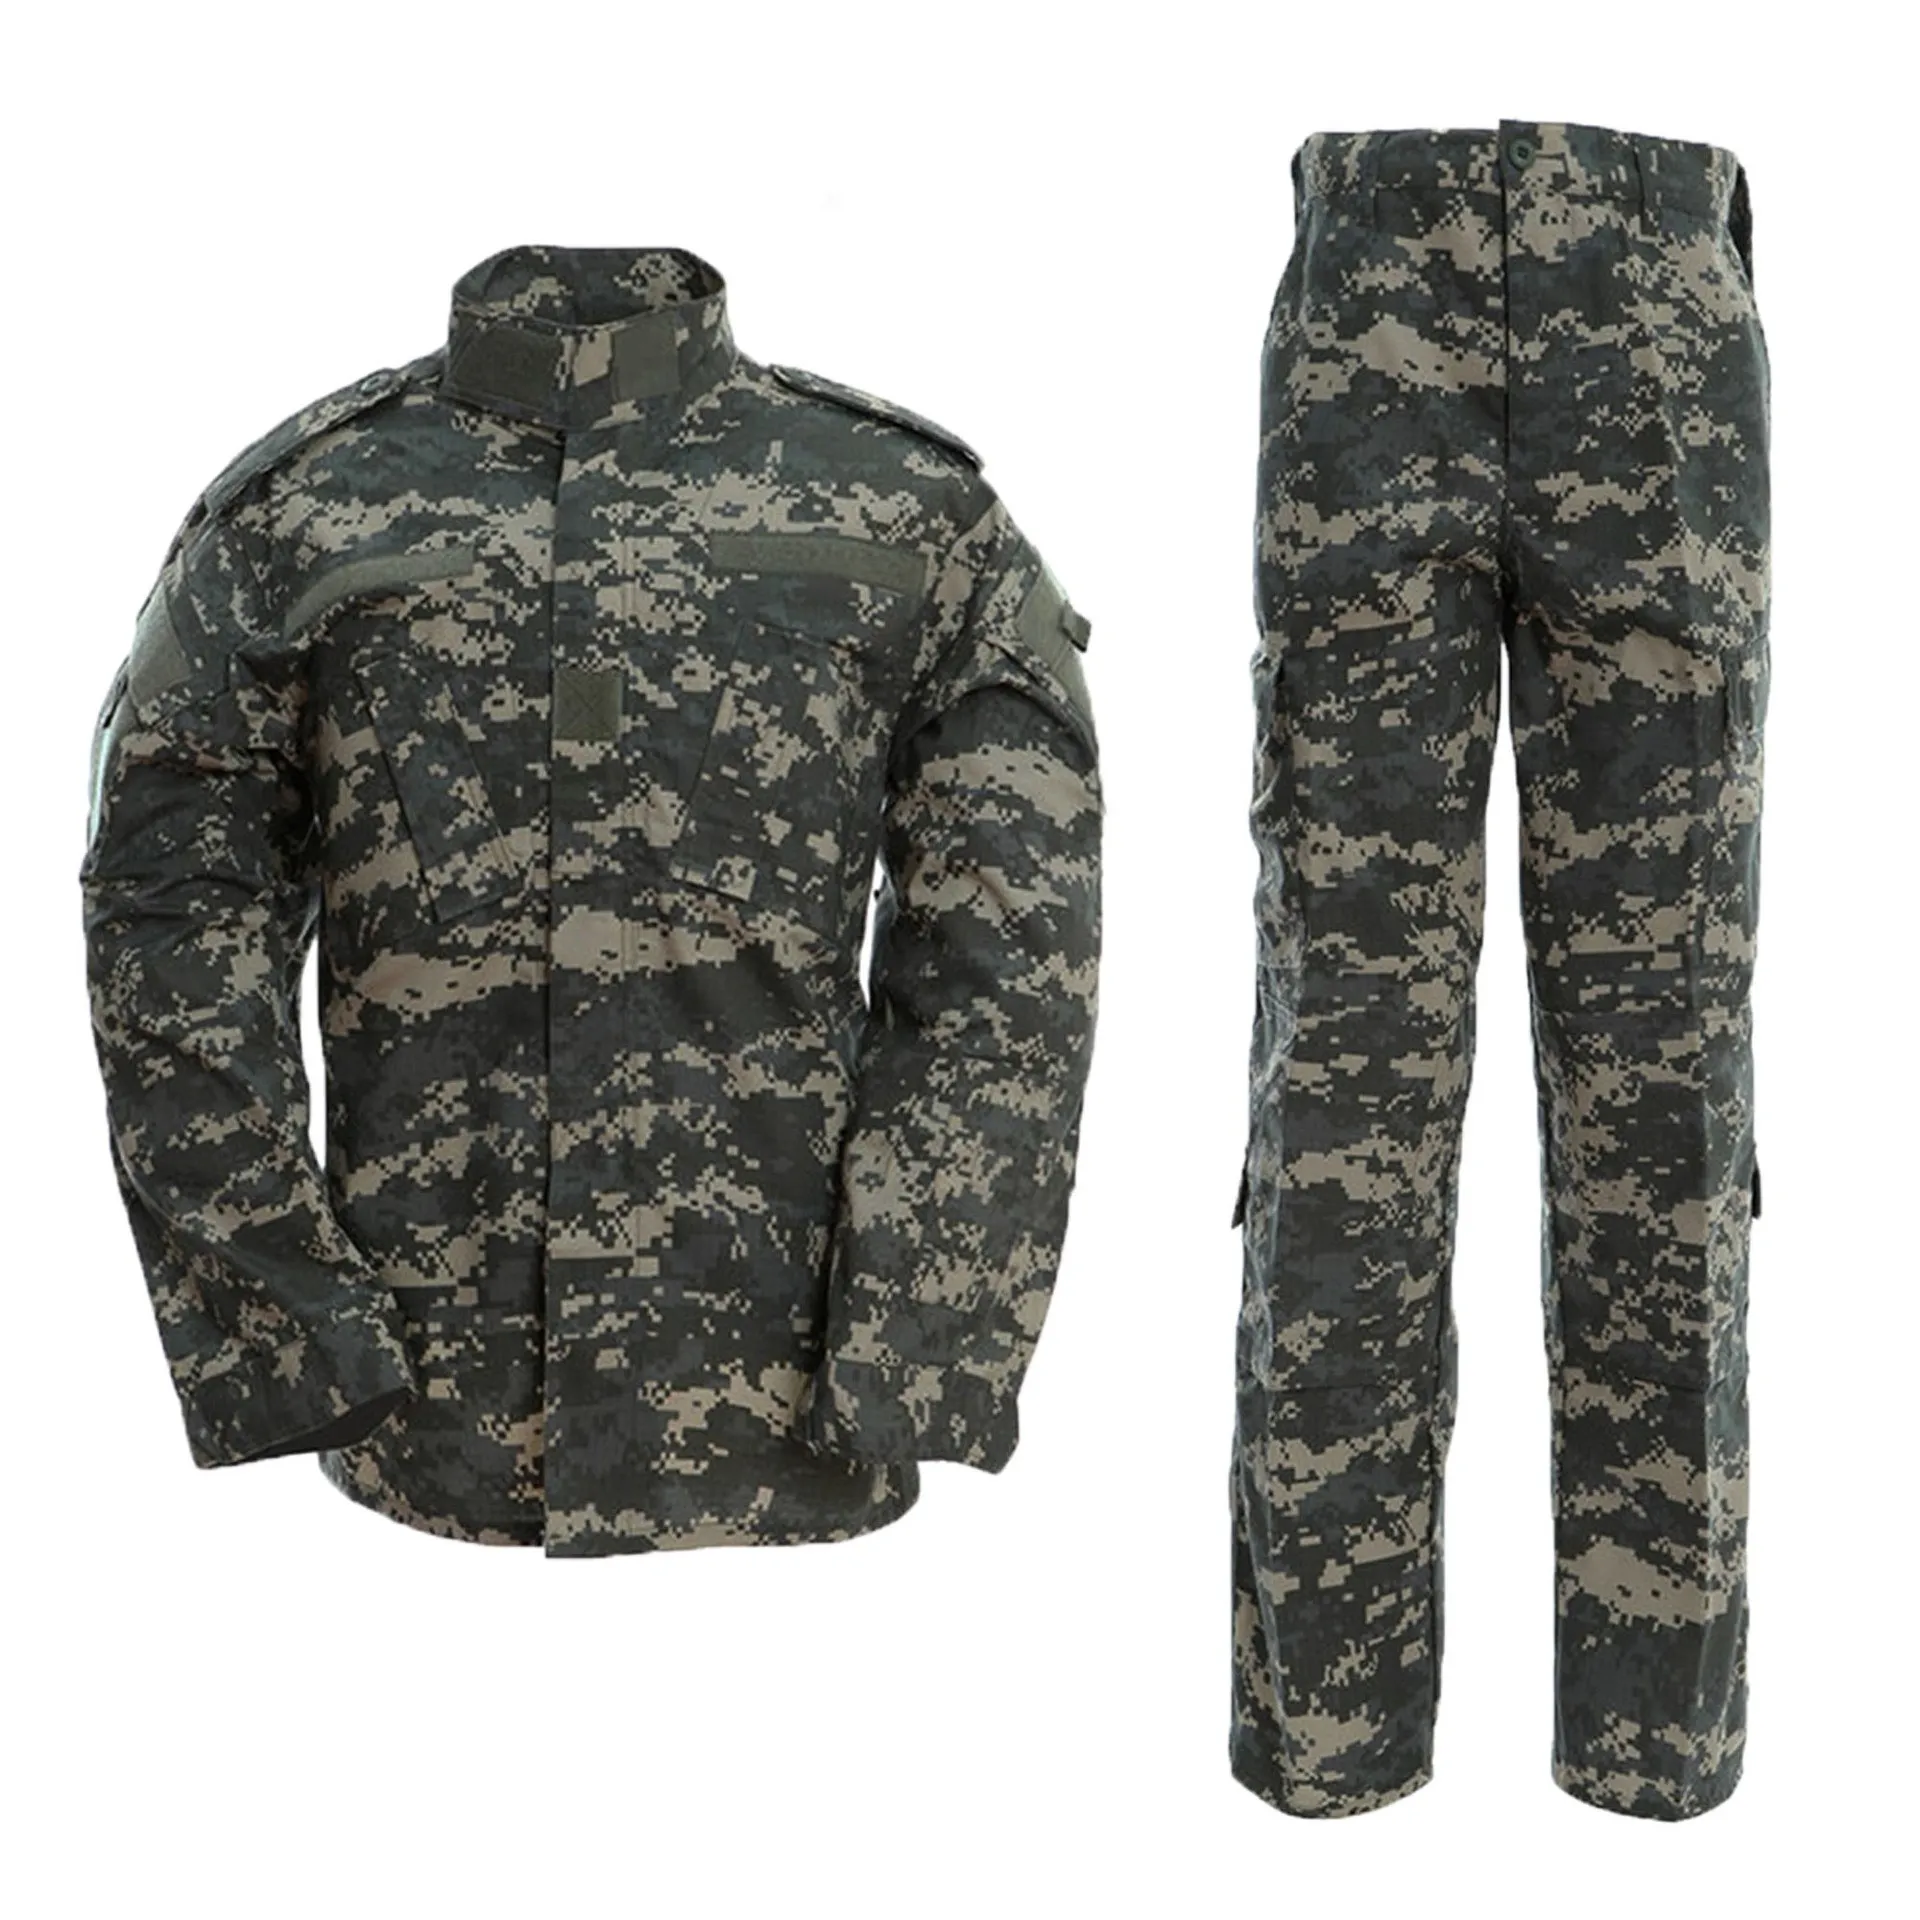 Military Uniform For Soldiers Everyday Clothing Cotton And Polyester ...